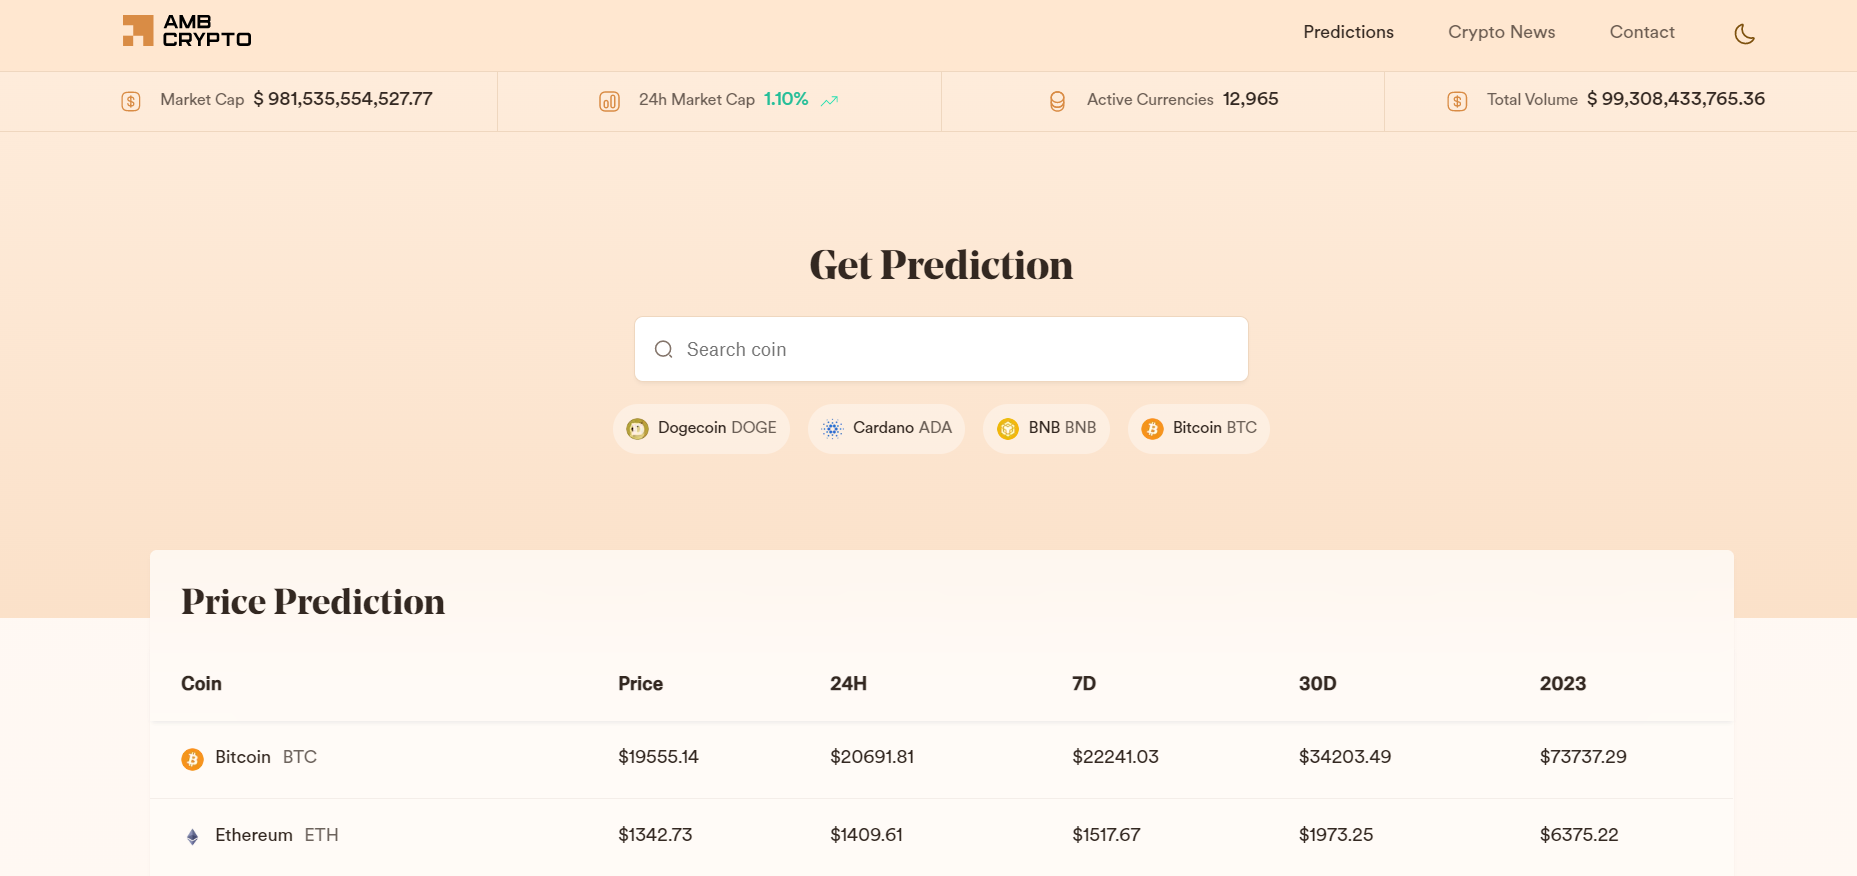 AMBCrypto launches AI and ML based crypto price prediction model